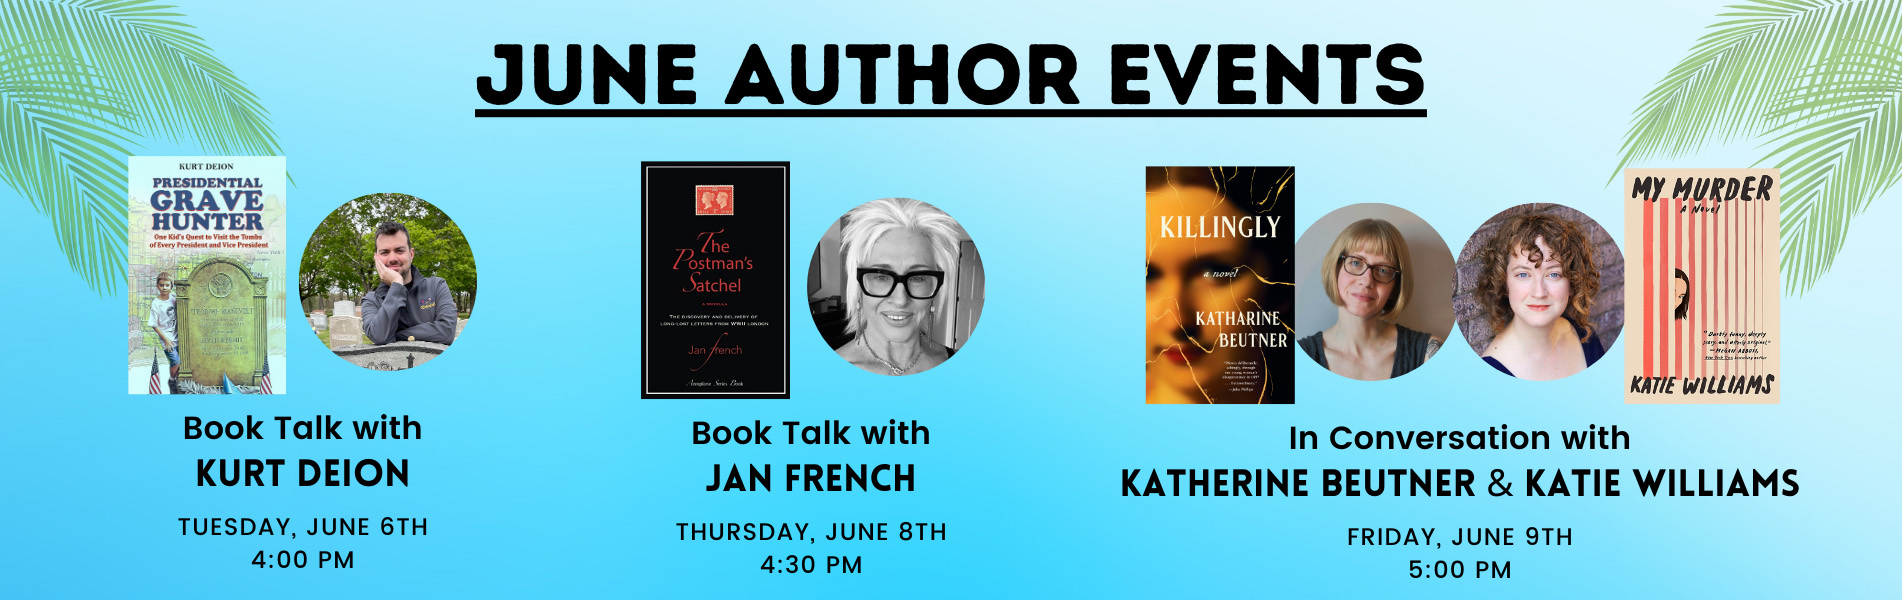 June Author Events at the Brown Bookstore